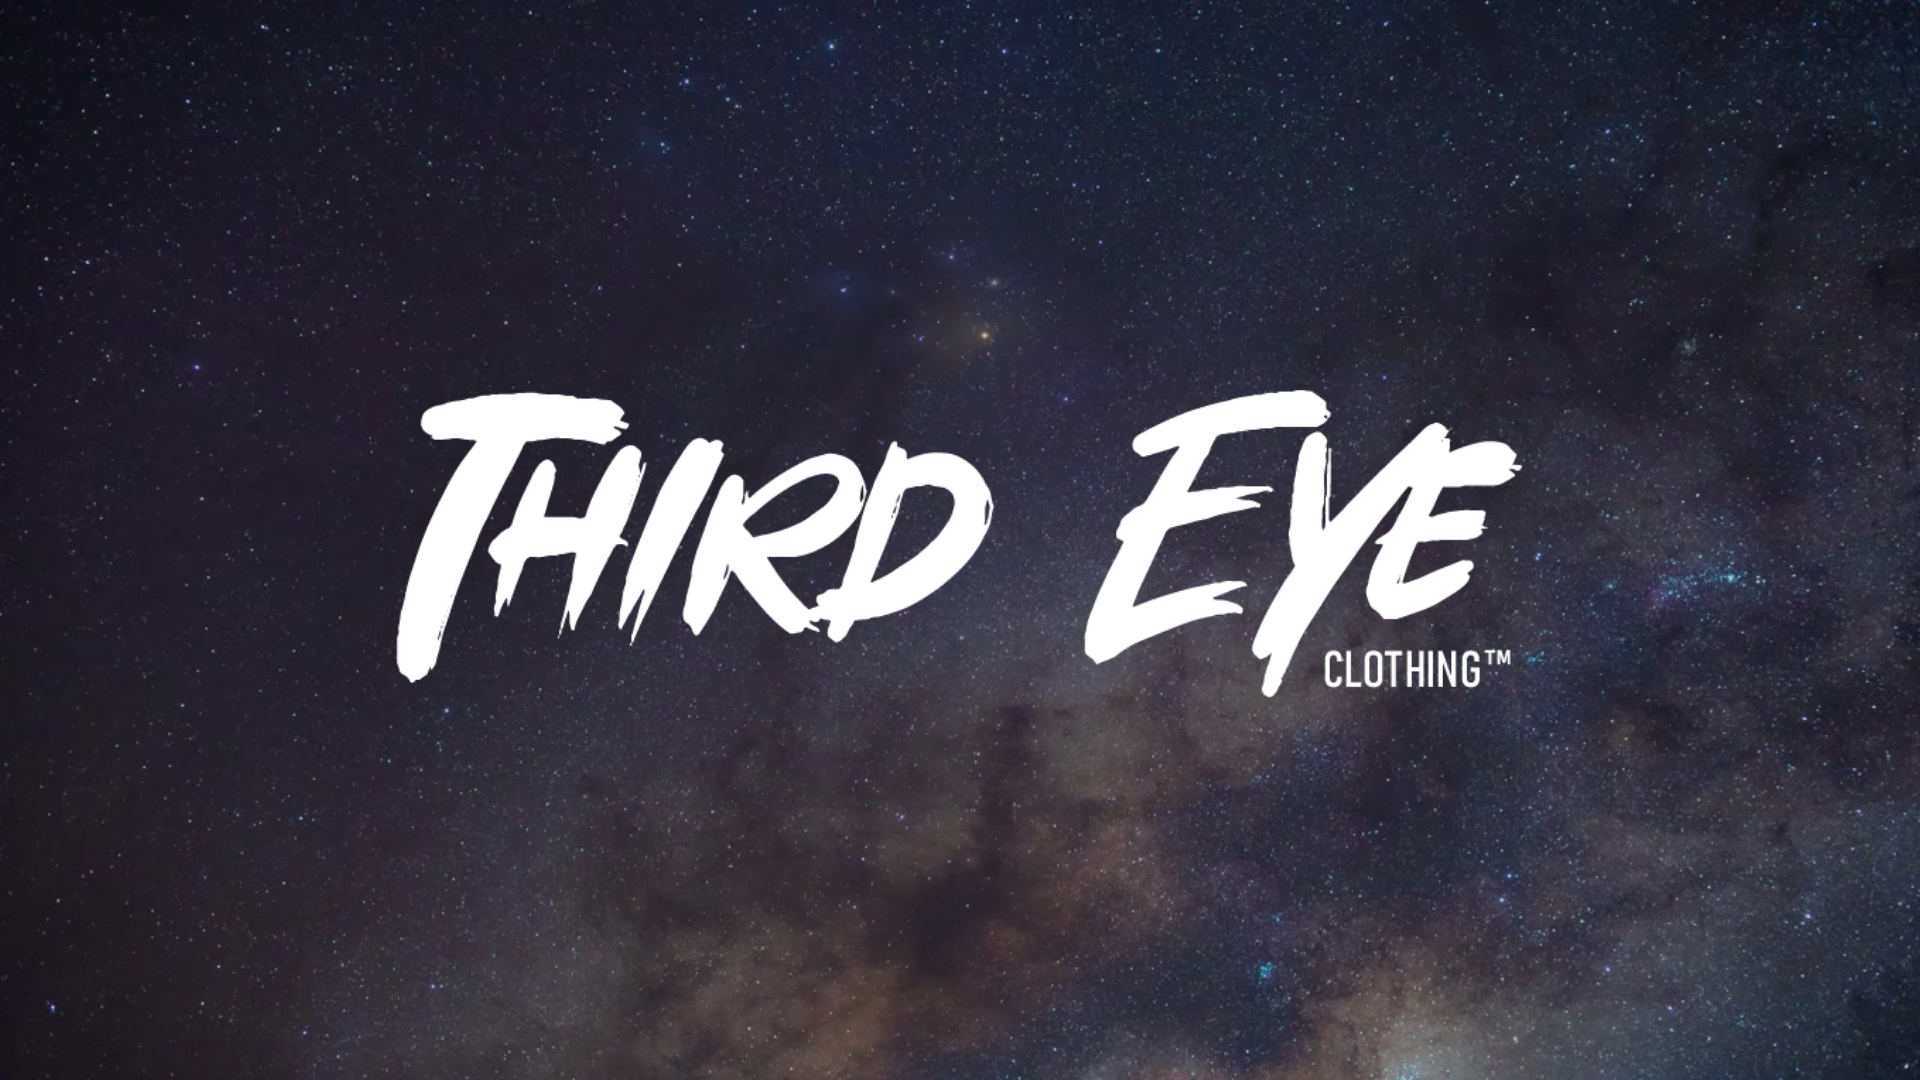 Load video: Short Video Promo - Third Eye Clothing - For the Adventurers - Wander Beyond the Ordinary